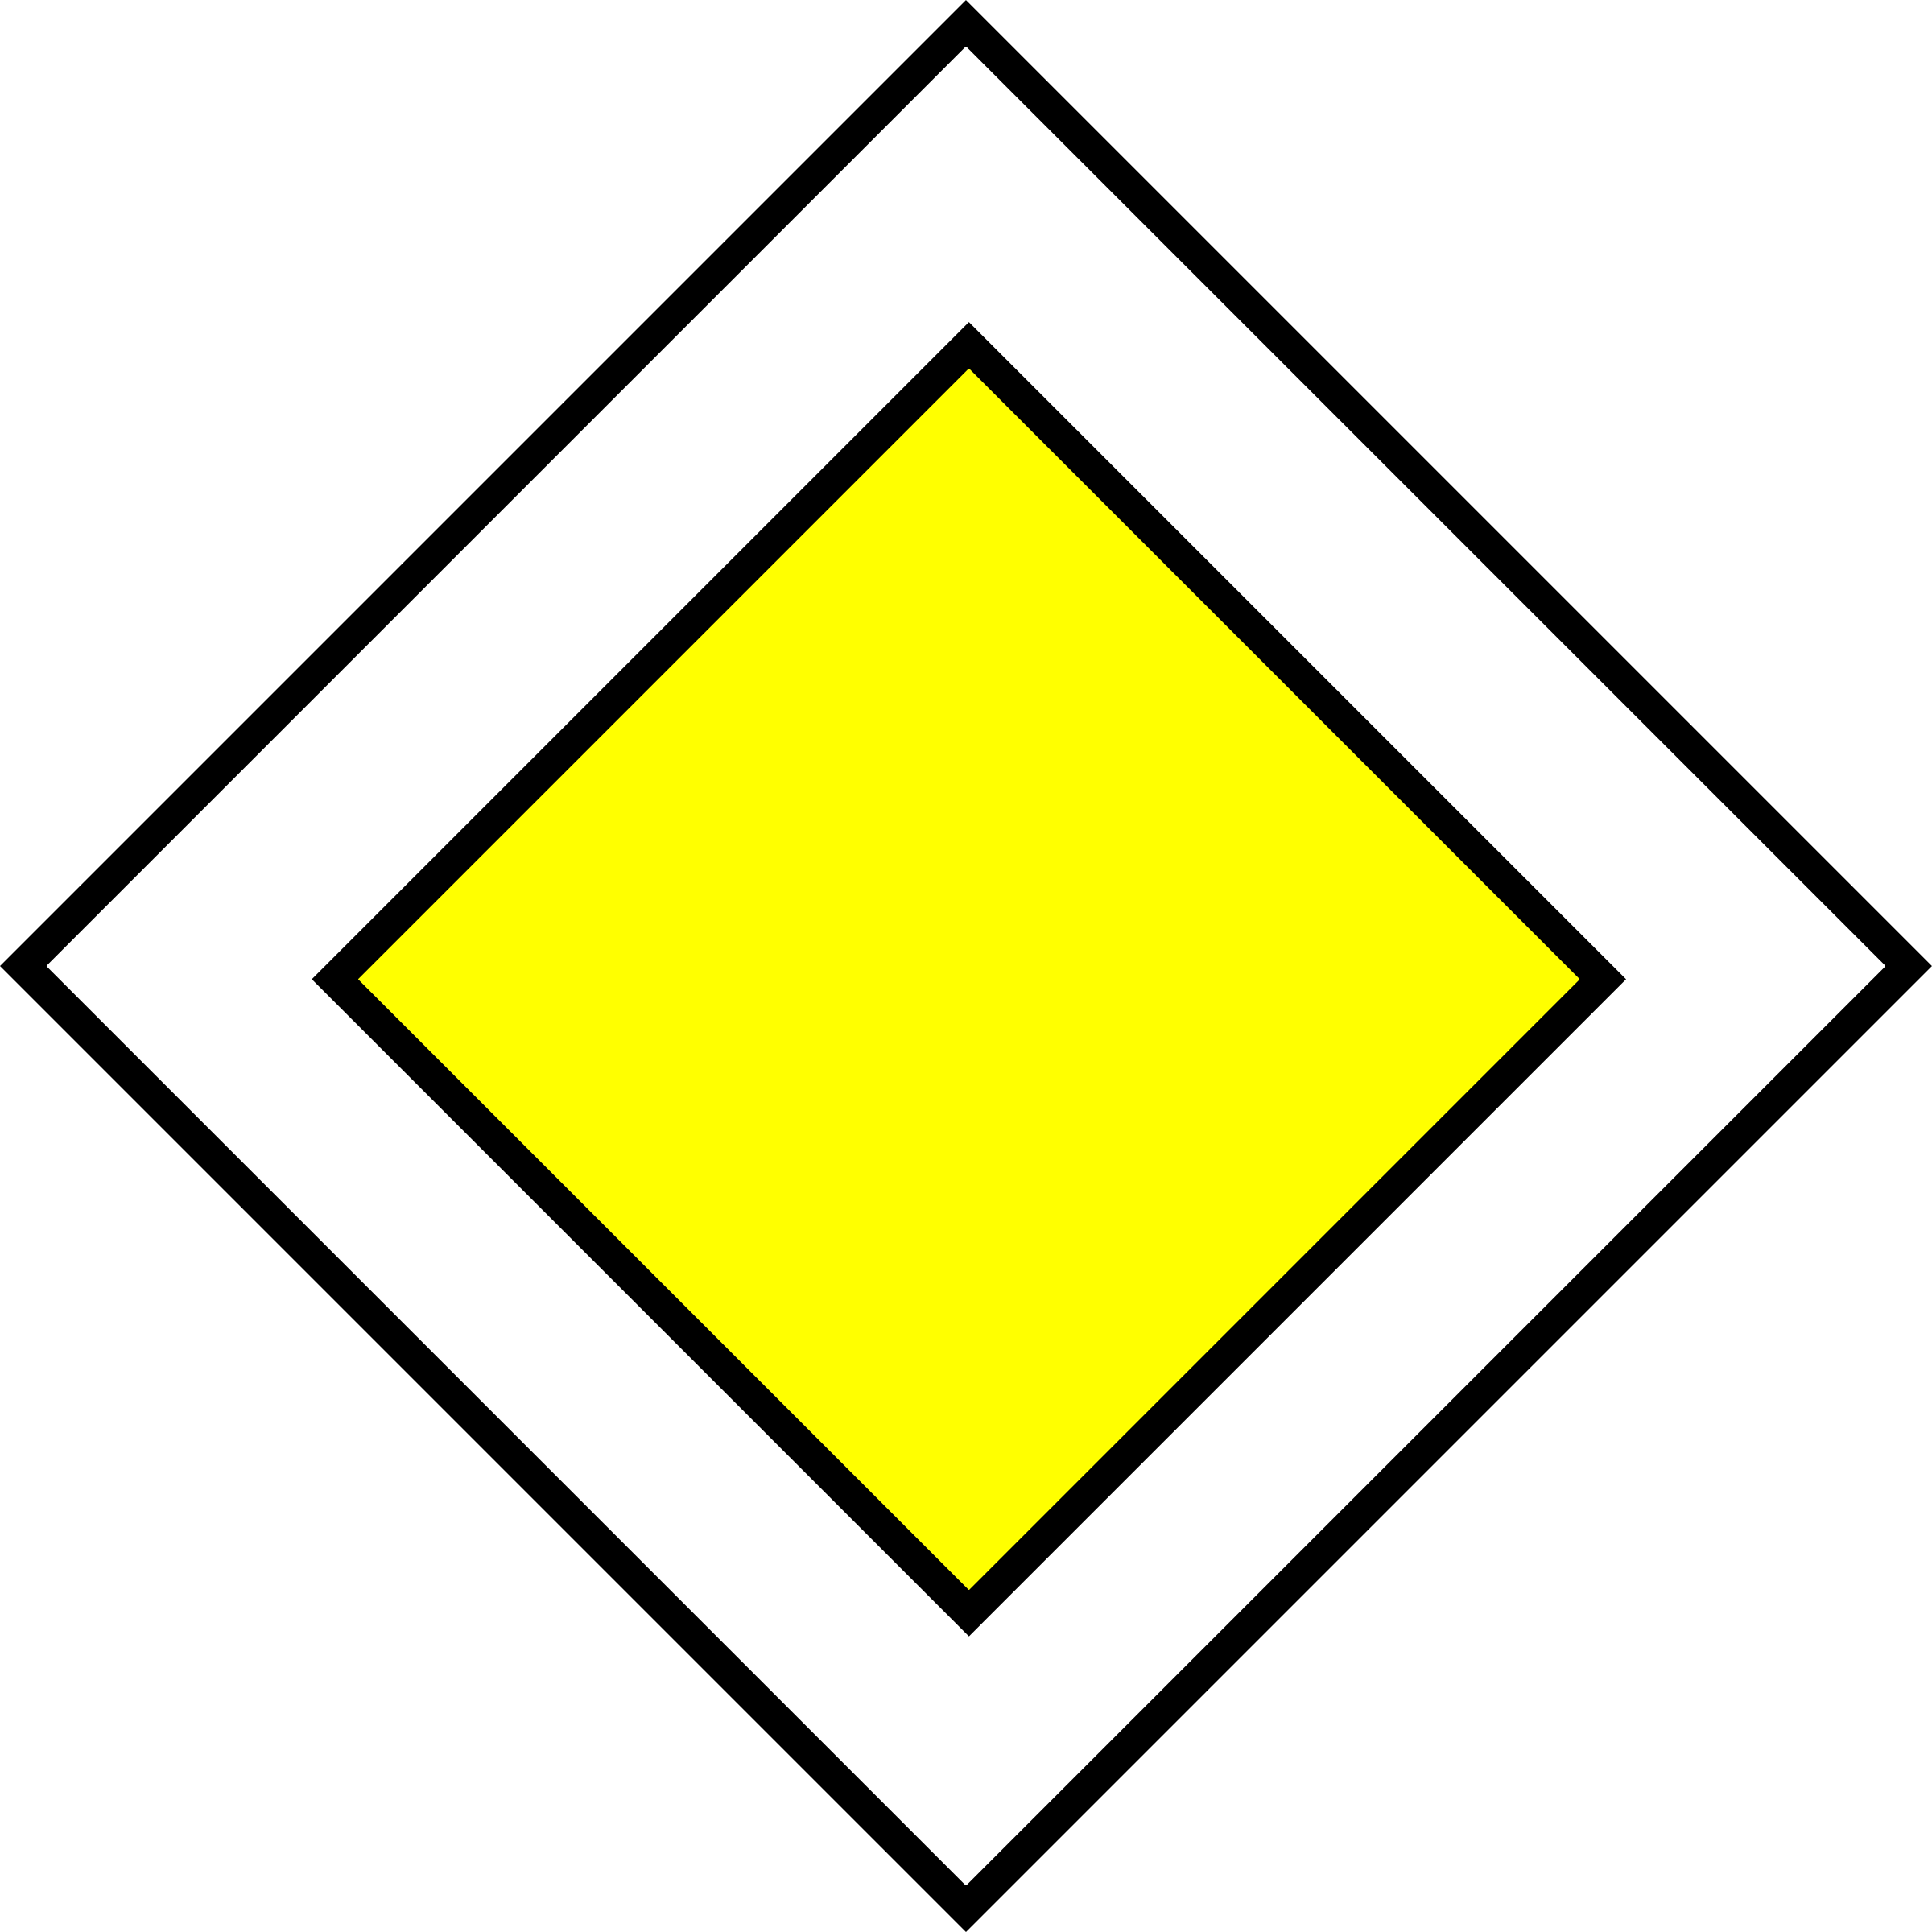 Yellow Diamond Road Sign Meaning (2400x2400)